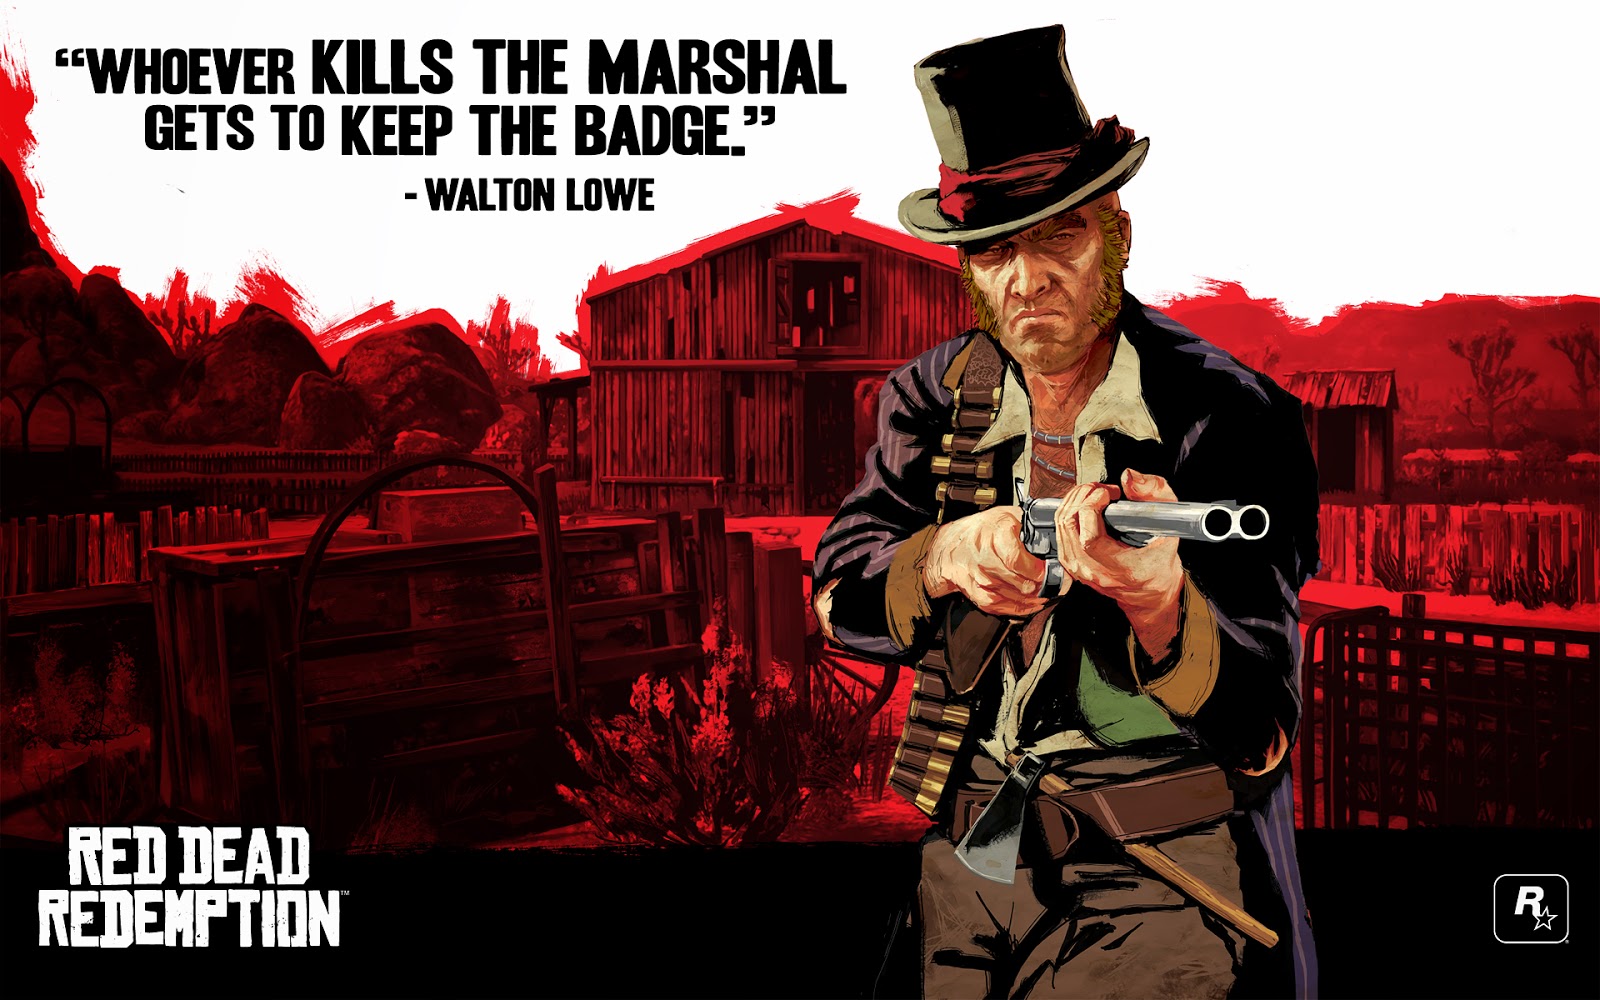 Red Dead Redemption Wallpaper And Theme For Windows